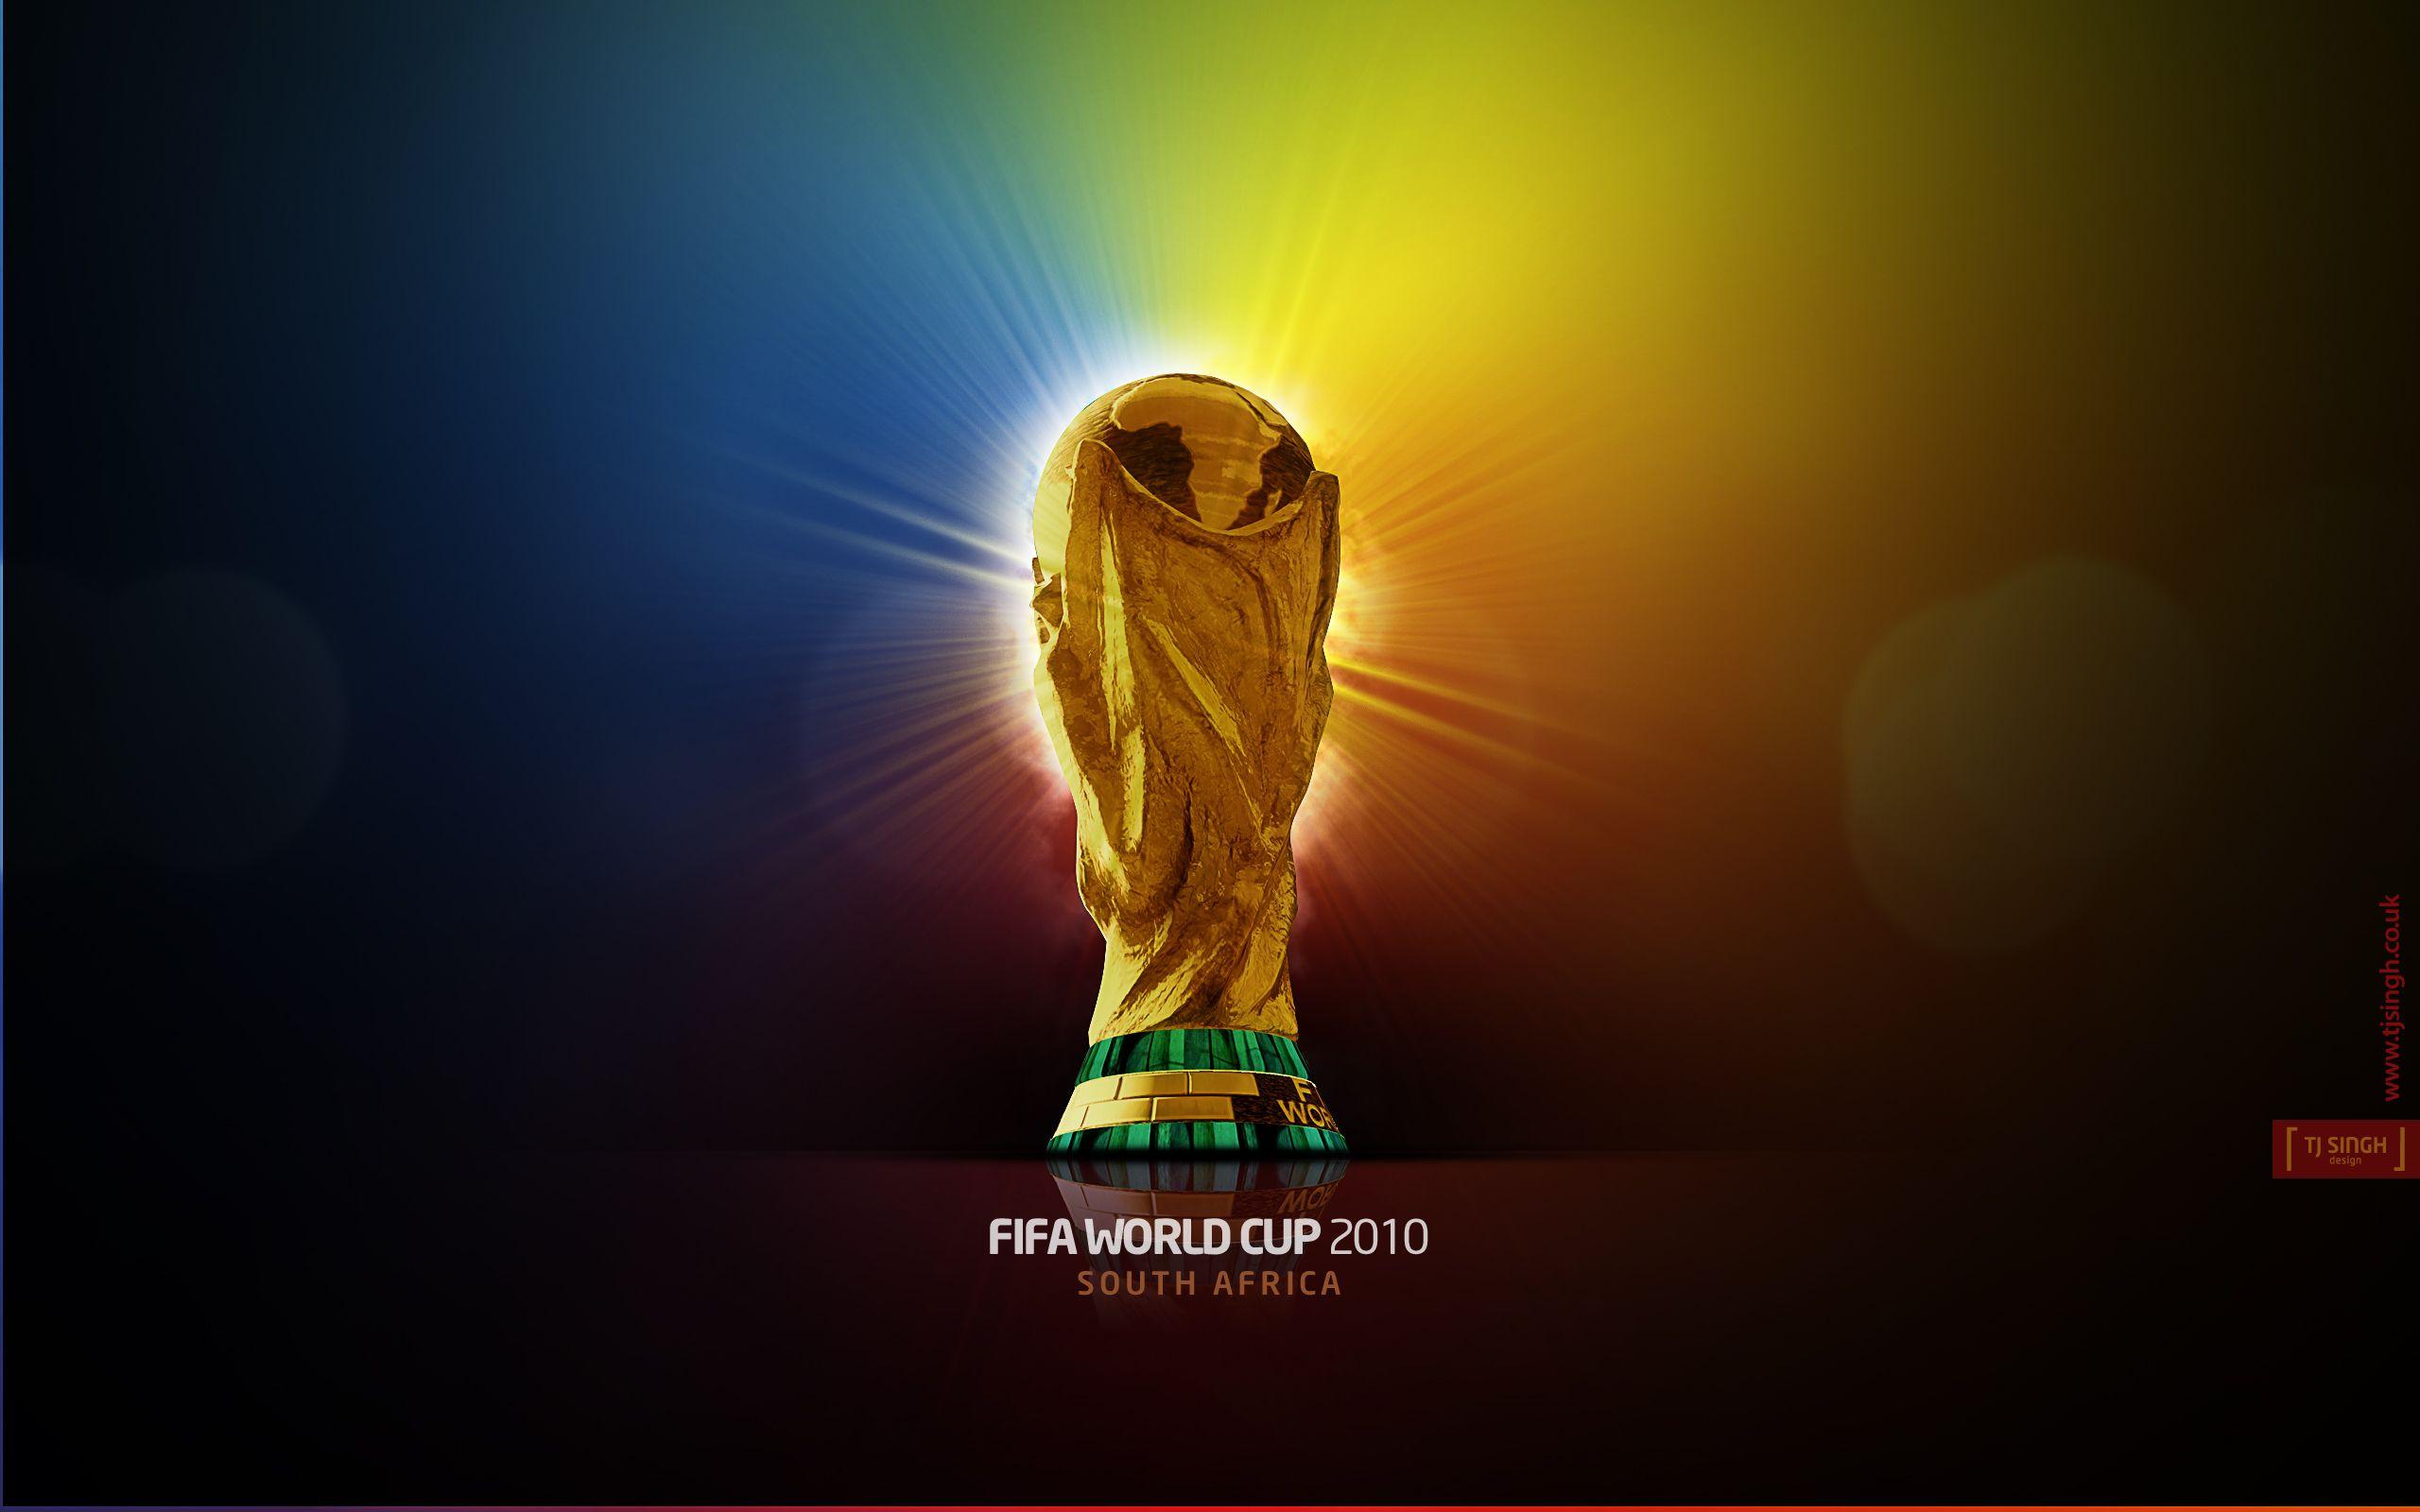 Fifa World Cup 2010 trophy wallpaper. Fifa World Cup 2010 trophy